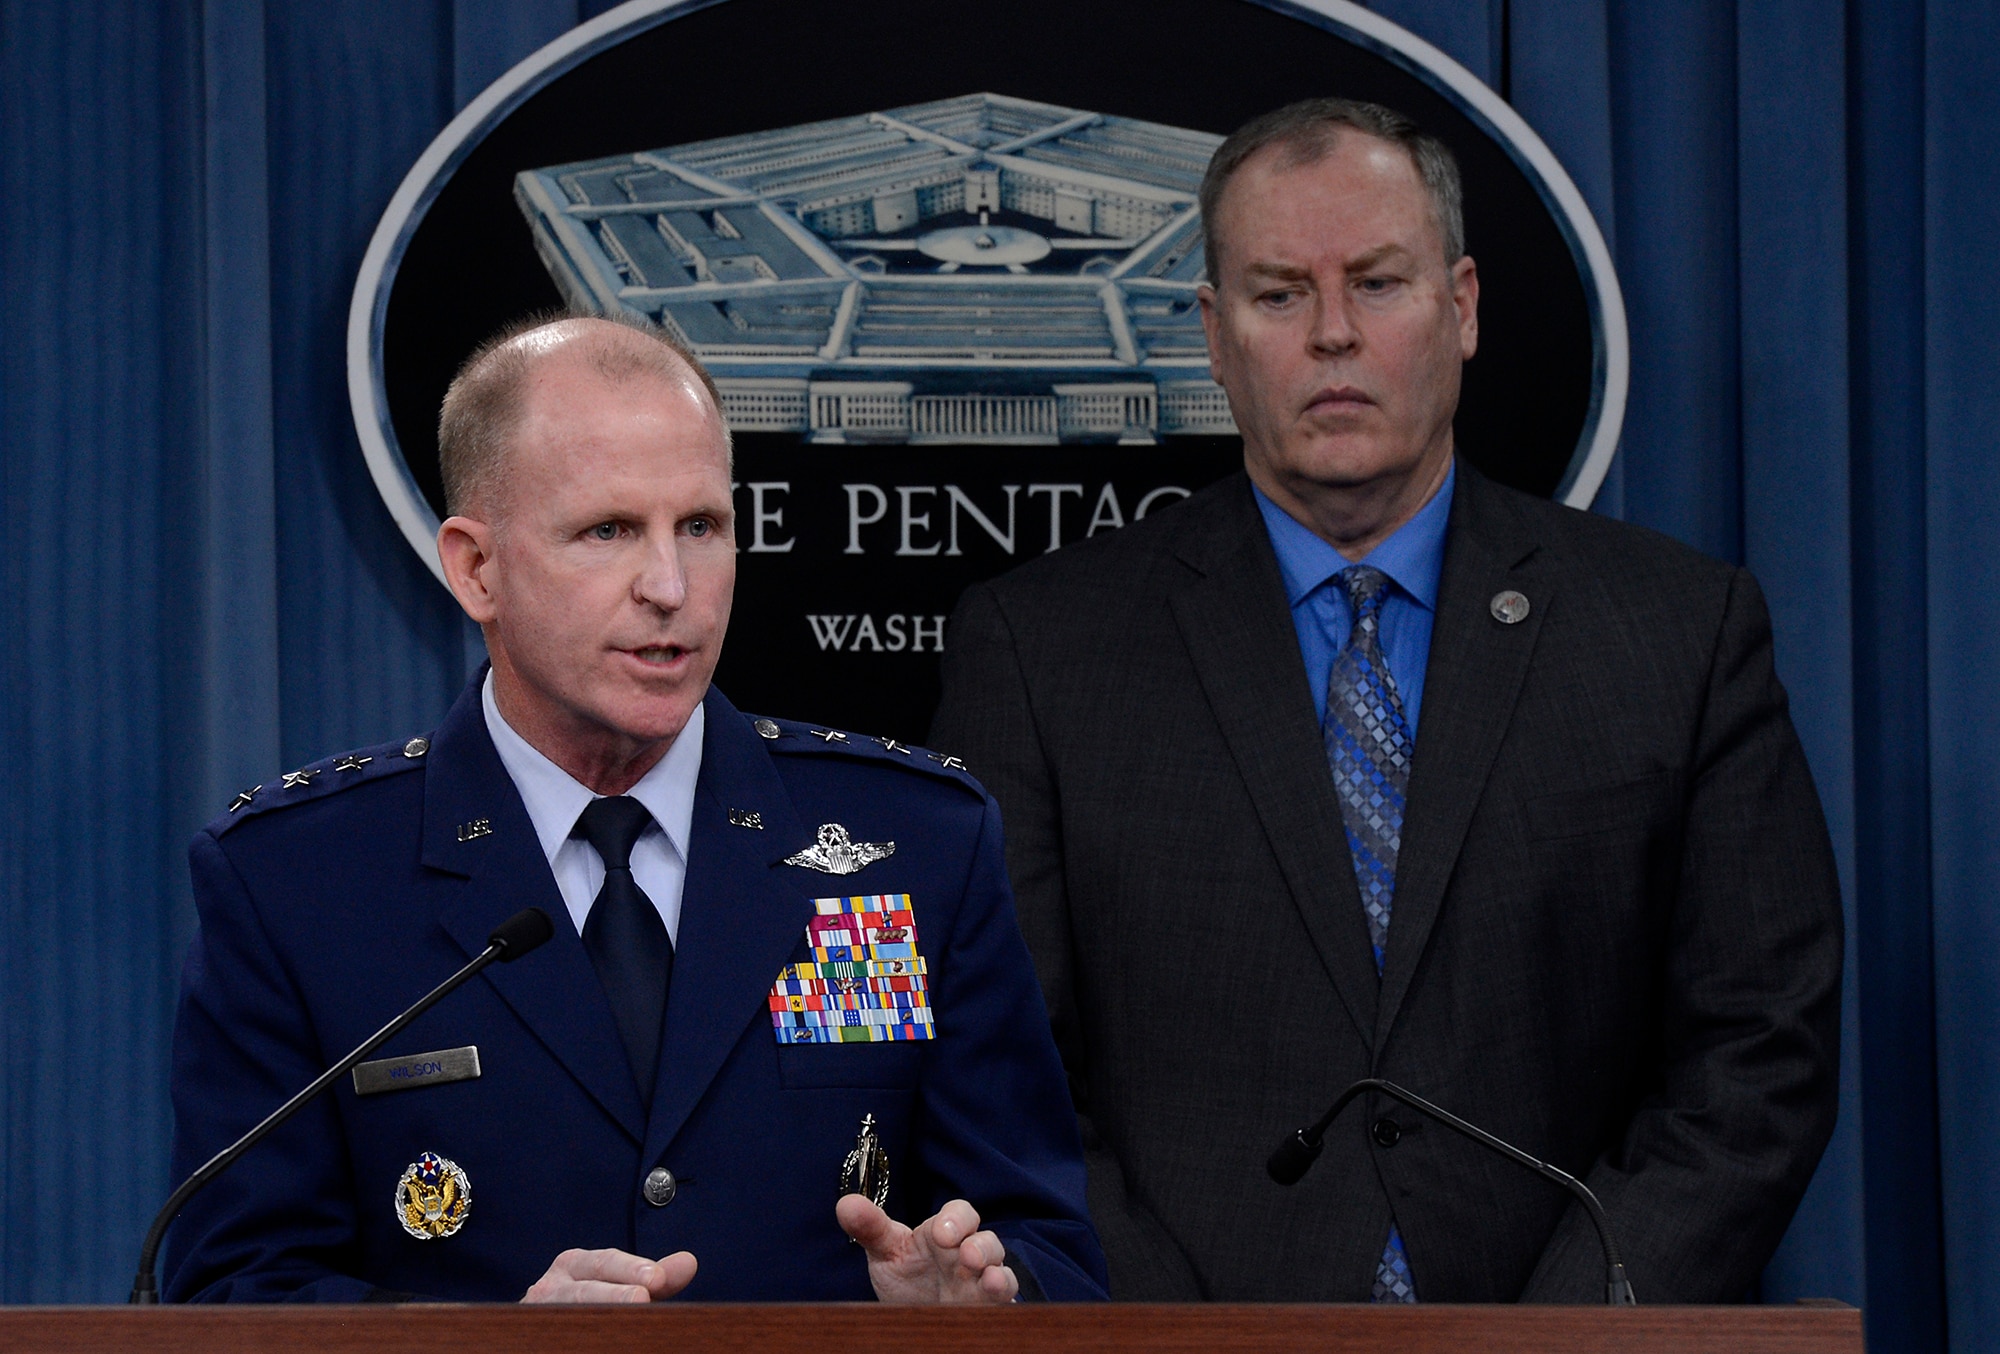 Lt. Gen. Stephen Wilson, the commander of Air Force Global Strike Command (left), and Deputy Secretary of Defense Robert Work respond to reporters' questions about the release of the Defense Department's Nuclear Enterprise Review during a press briefing Nov. 14, 2014, at the Pentagon. The findings and recommendations from that review are consistent with actions the Air Force and AFGSC have been taking to improve its nuclear enterprise. (U.S. Air Force photo/Scott M. Ash)